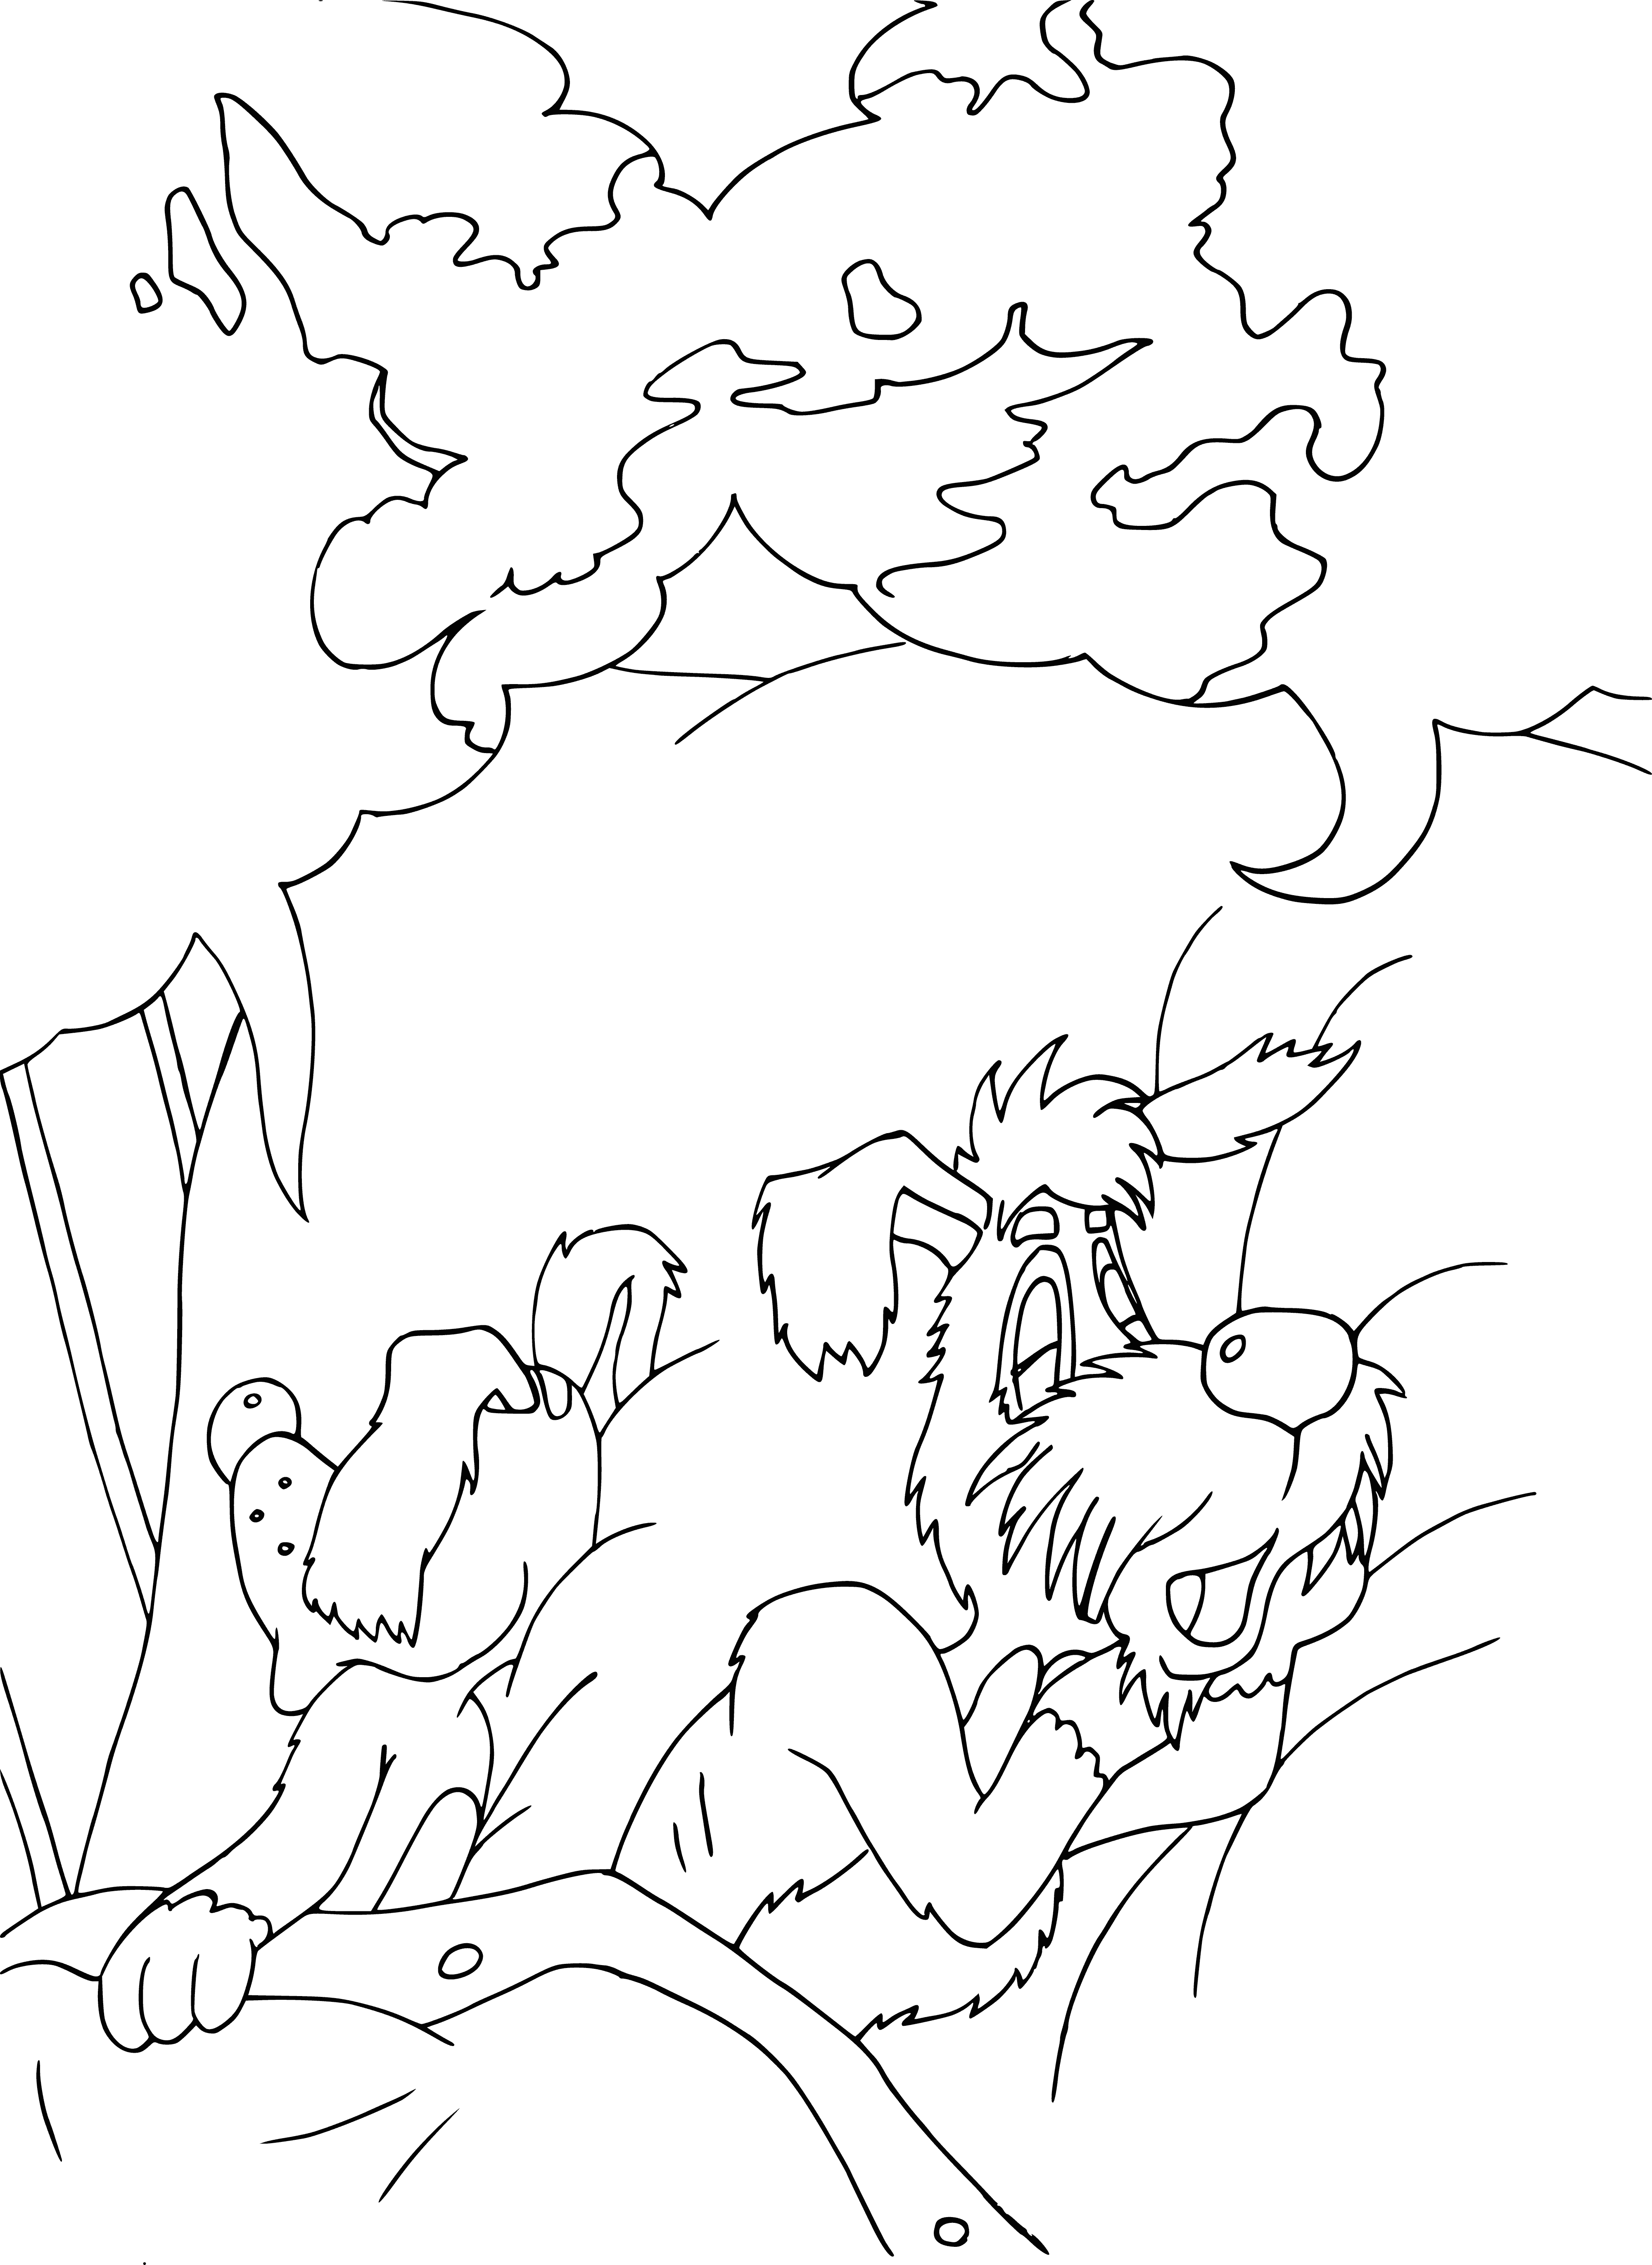 coloring page: Dogs sleep on the floor; Bobik stands nearby.